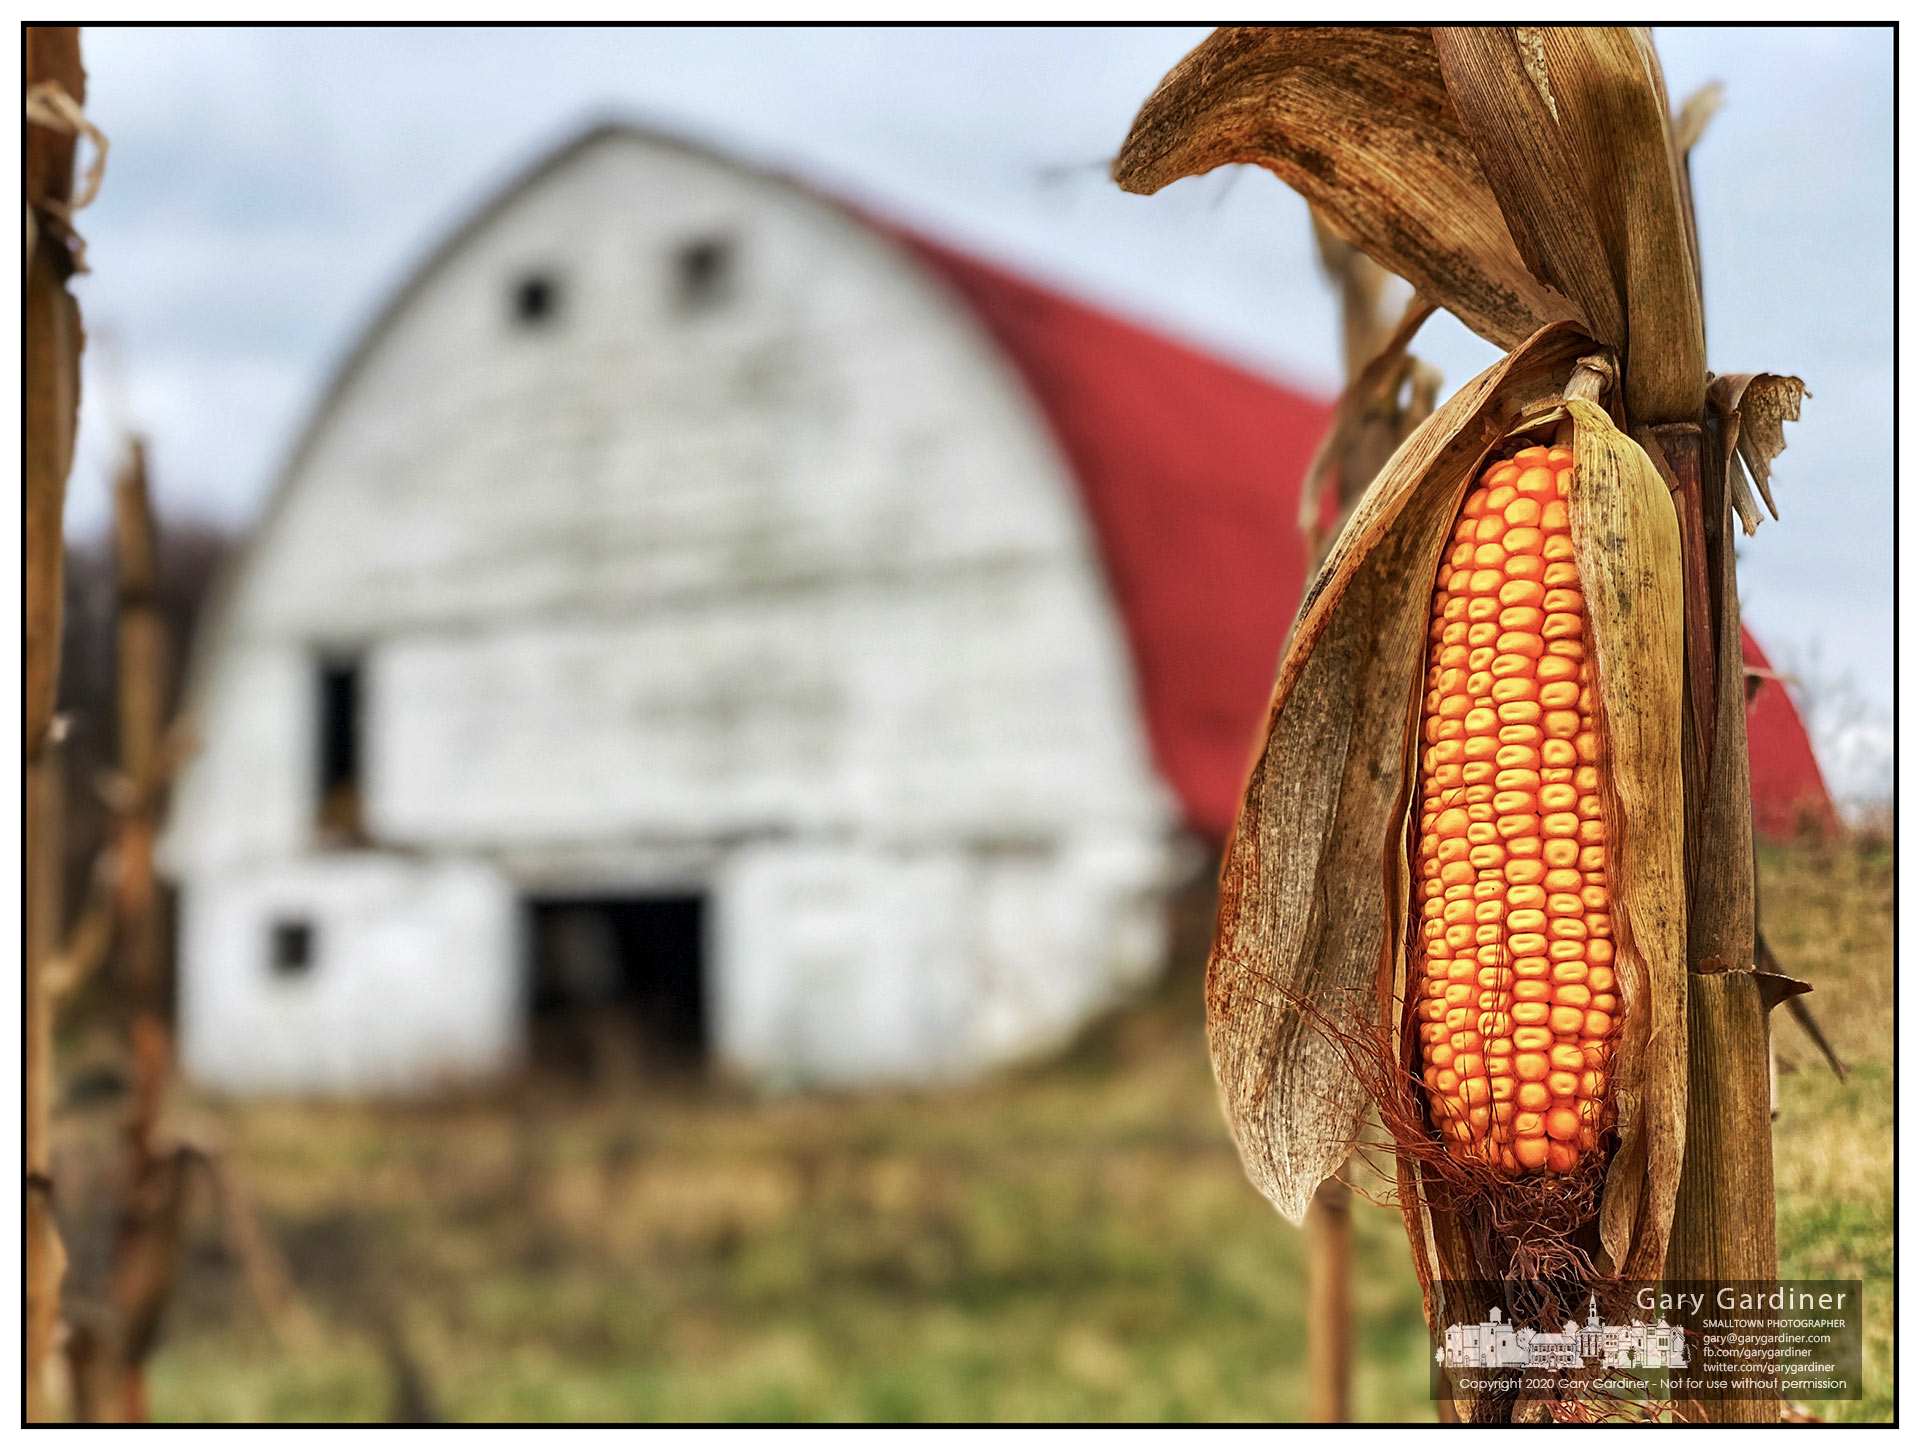 An ear of corn hangs from a dried stalk of one of the fields of corn ready for harvest adjacent to the barn at the Braun Farm. My Final Photo for Dec. 14, 2020.